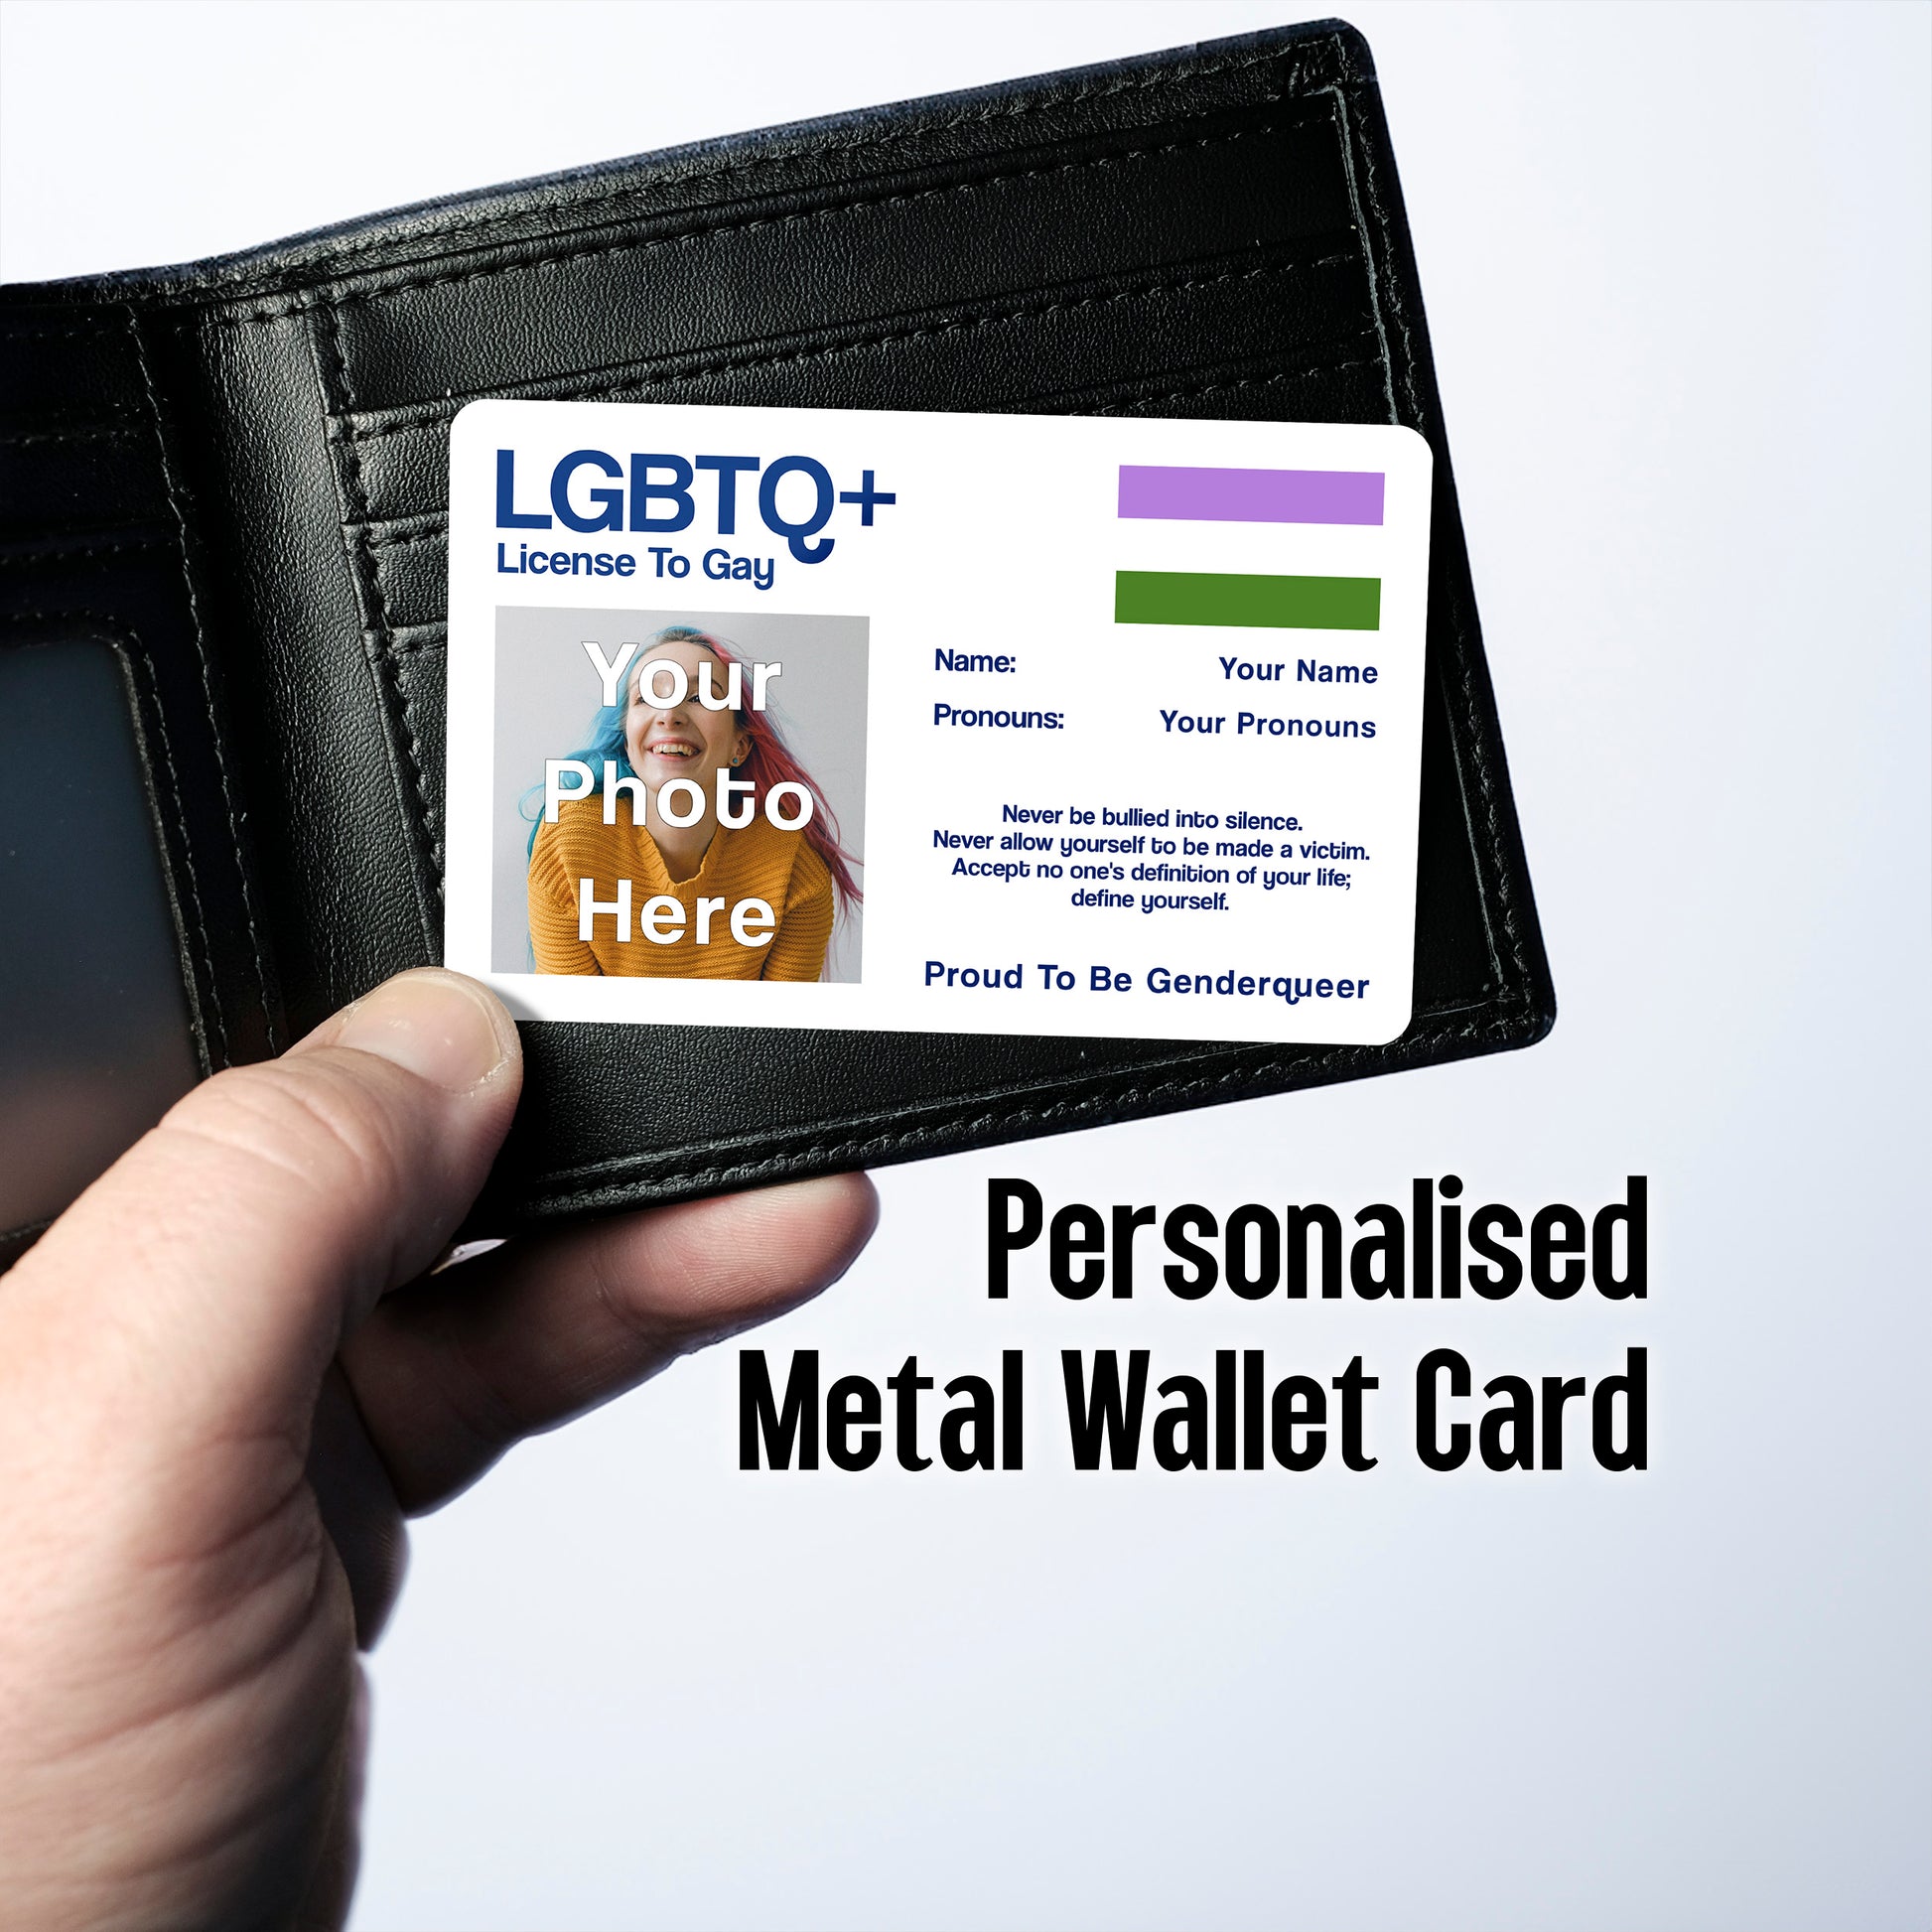 Genderqueer license to gay aluminium wallet card personalised with your name, pronouns and photo.